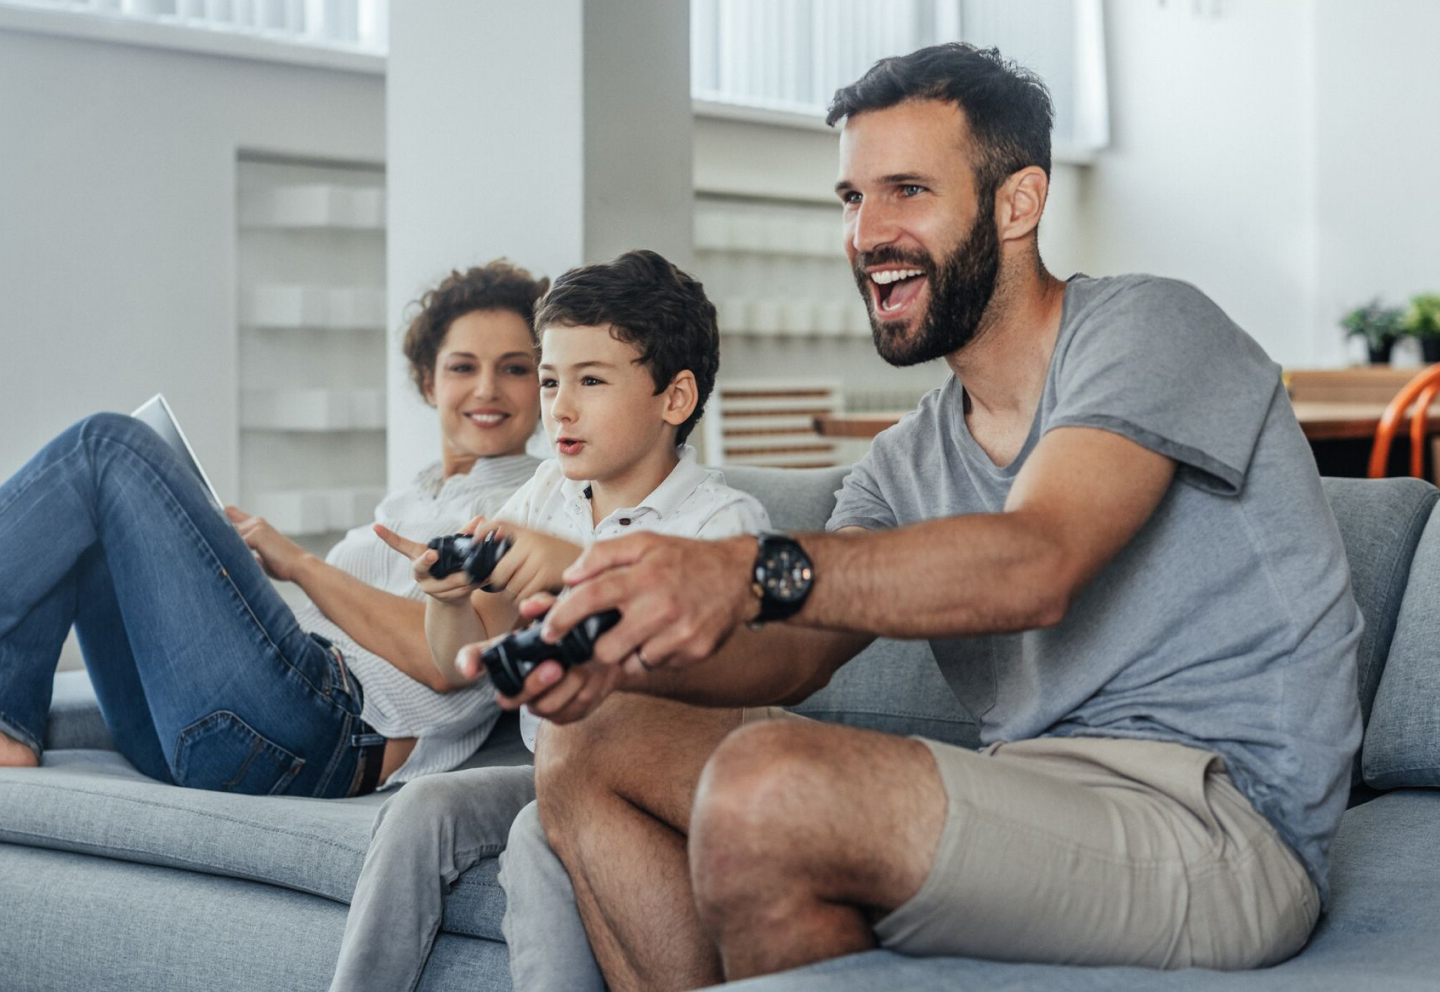 Father and son playing video games while mom watches